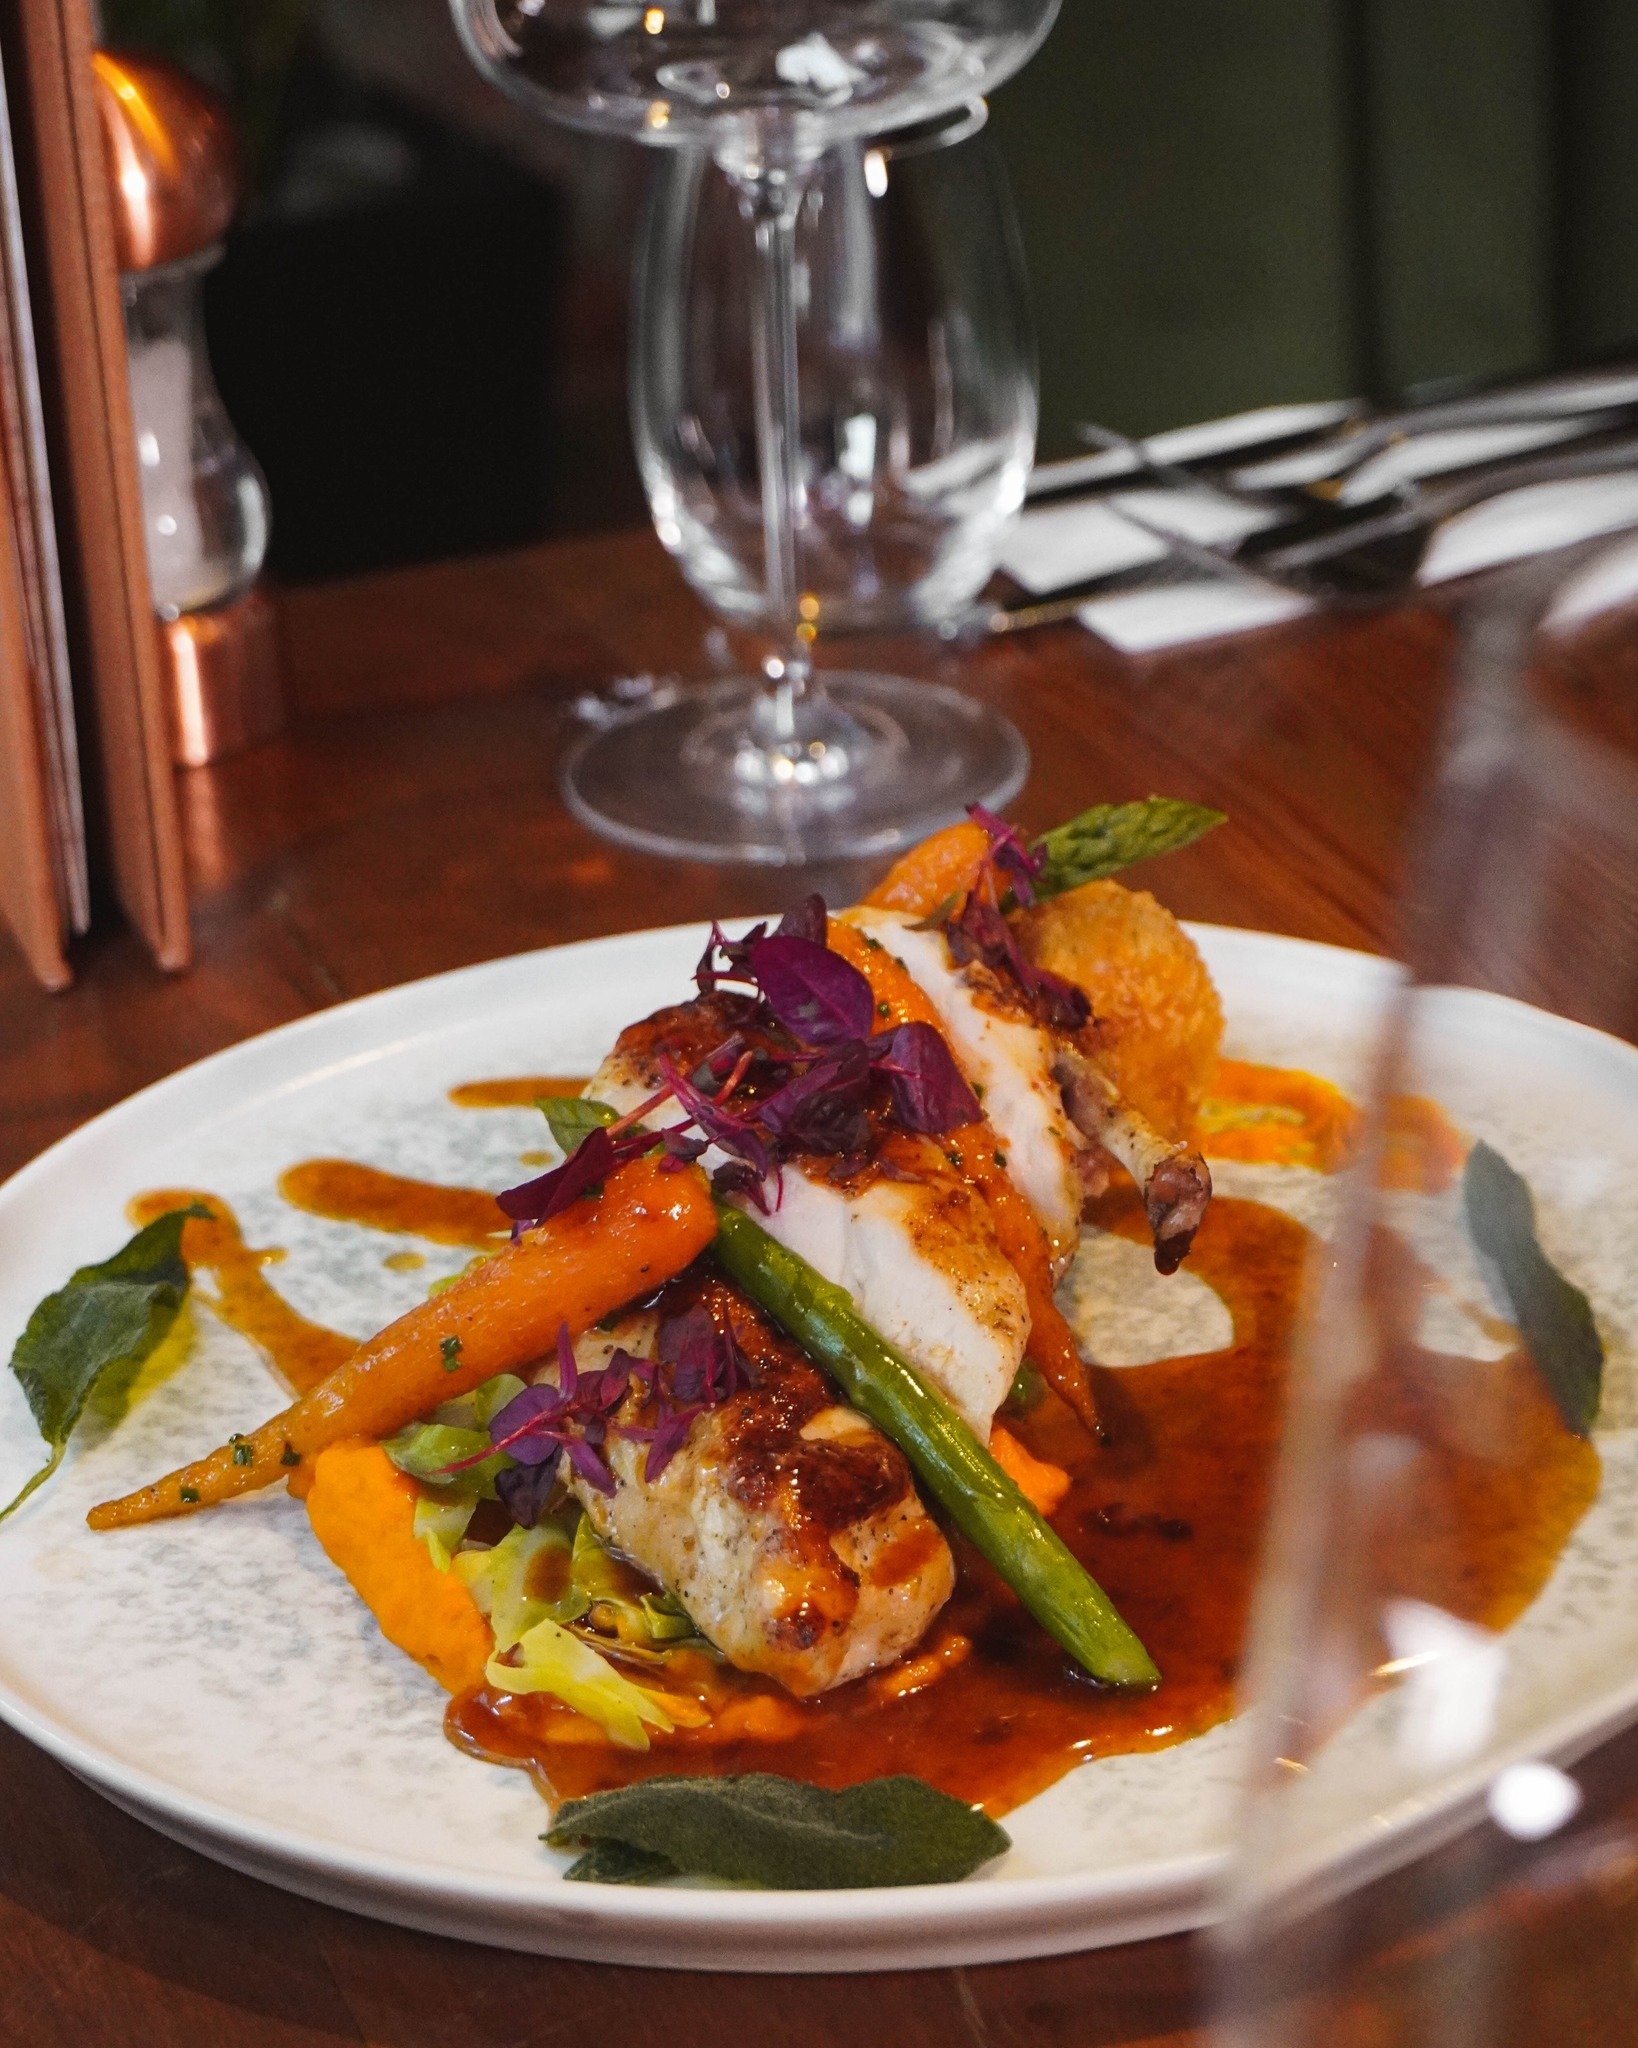 Wanting to go out for dinner tonight? 🍽

Be sure to check our our new Spring Menu, including our delicious corn-fed chicken!

Book your table on our website (link in bio)

#newcastlefood #newcastlefoodies #newcastlebarsandrestaurants #NE1food